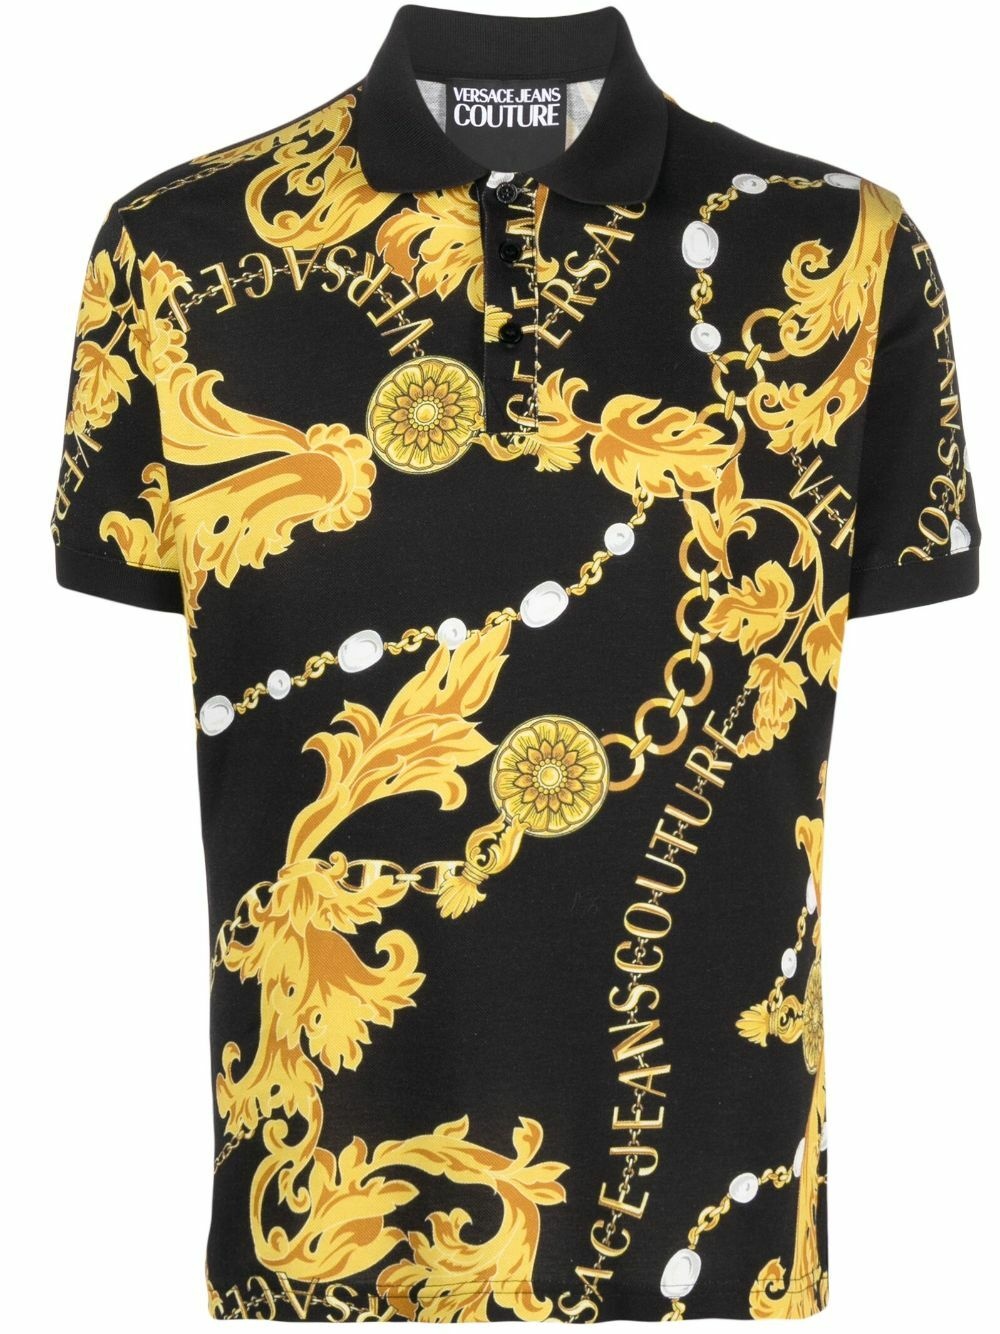 VERSACE JEANS COUTURE - Printed Shirt Versace